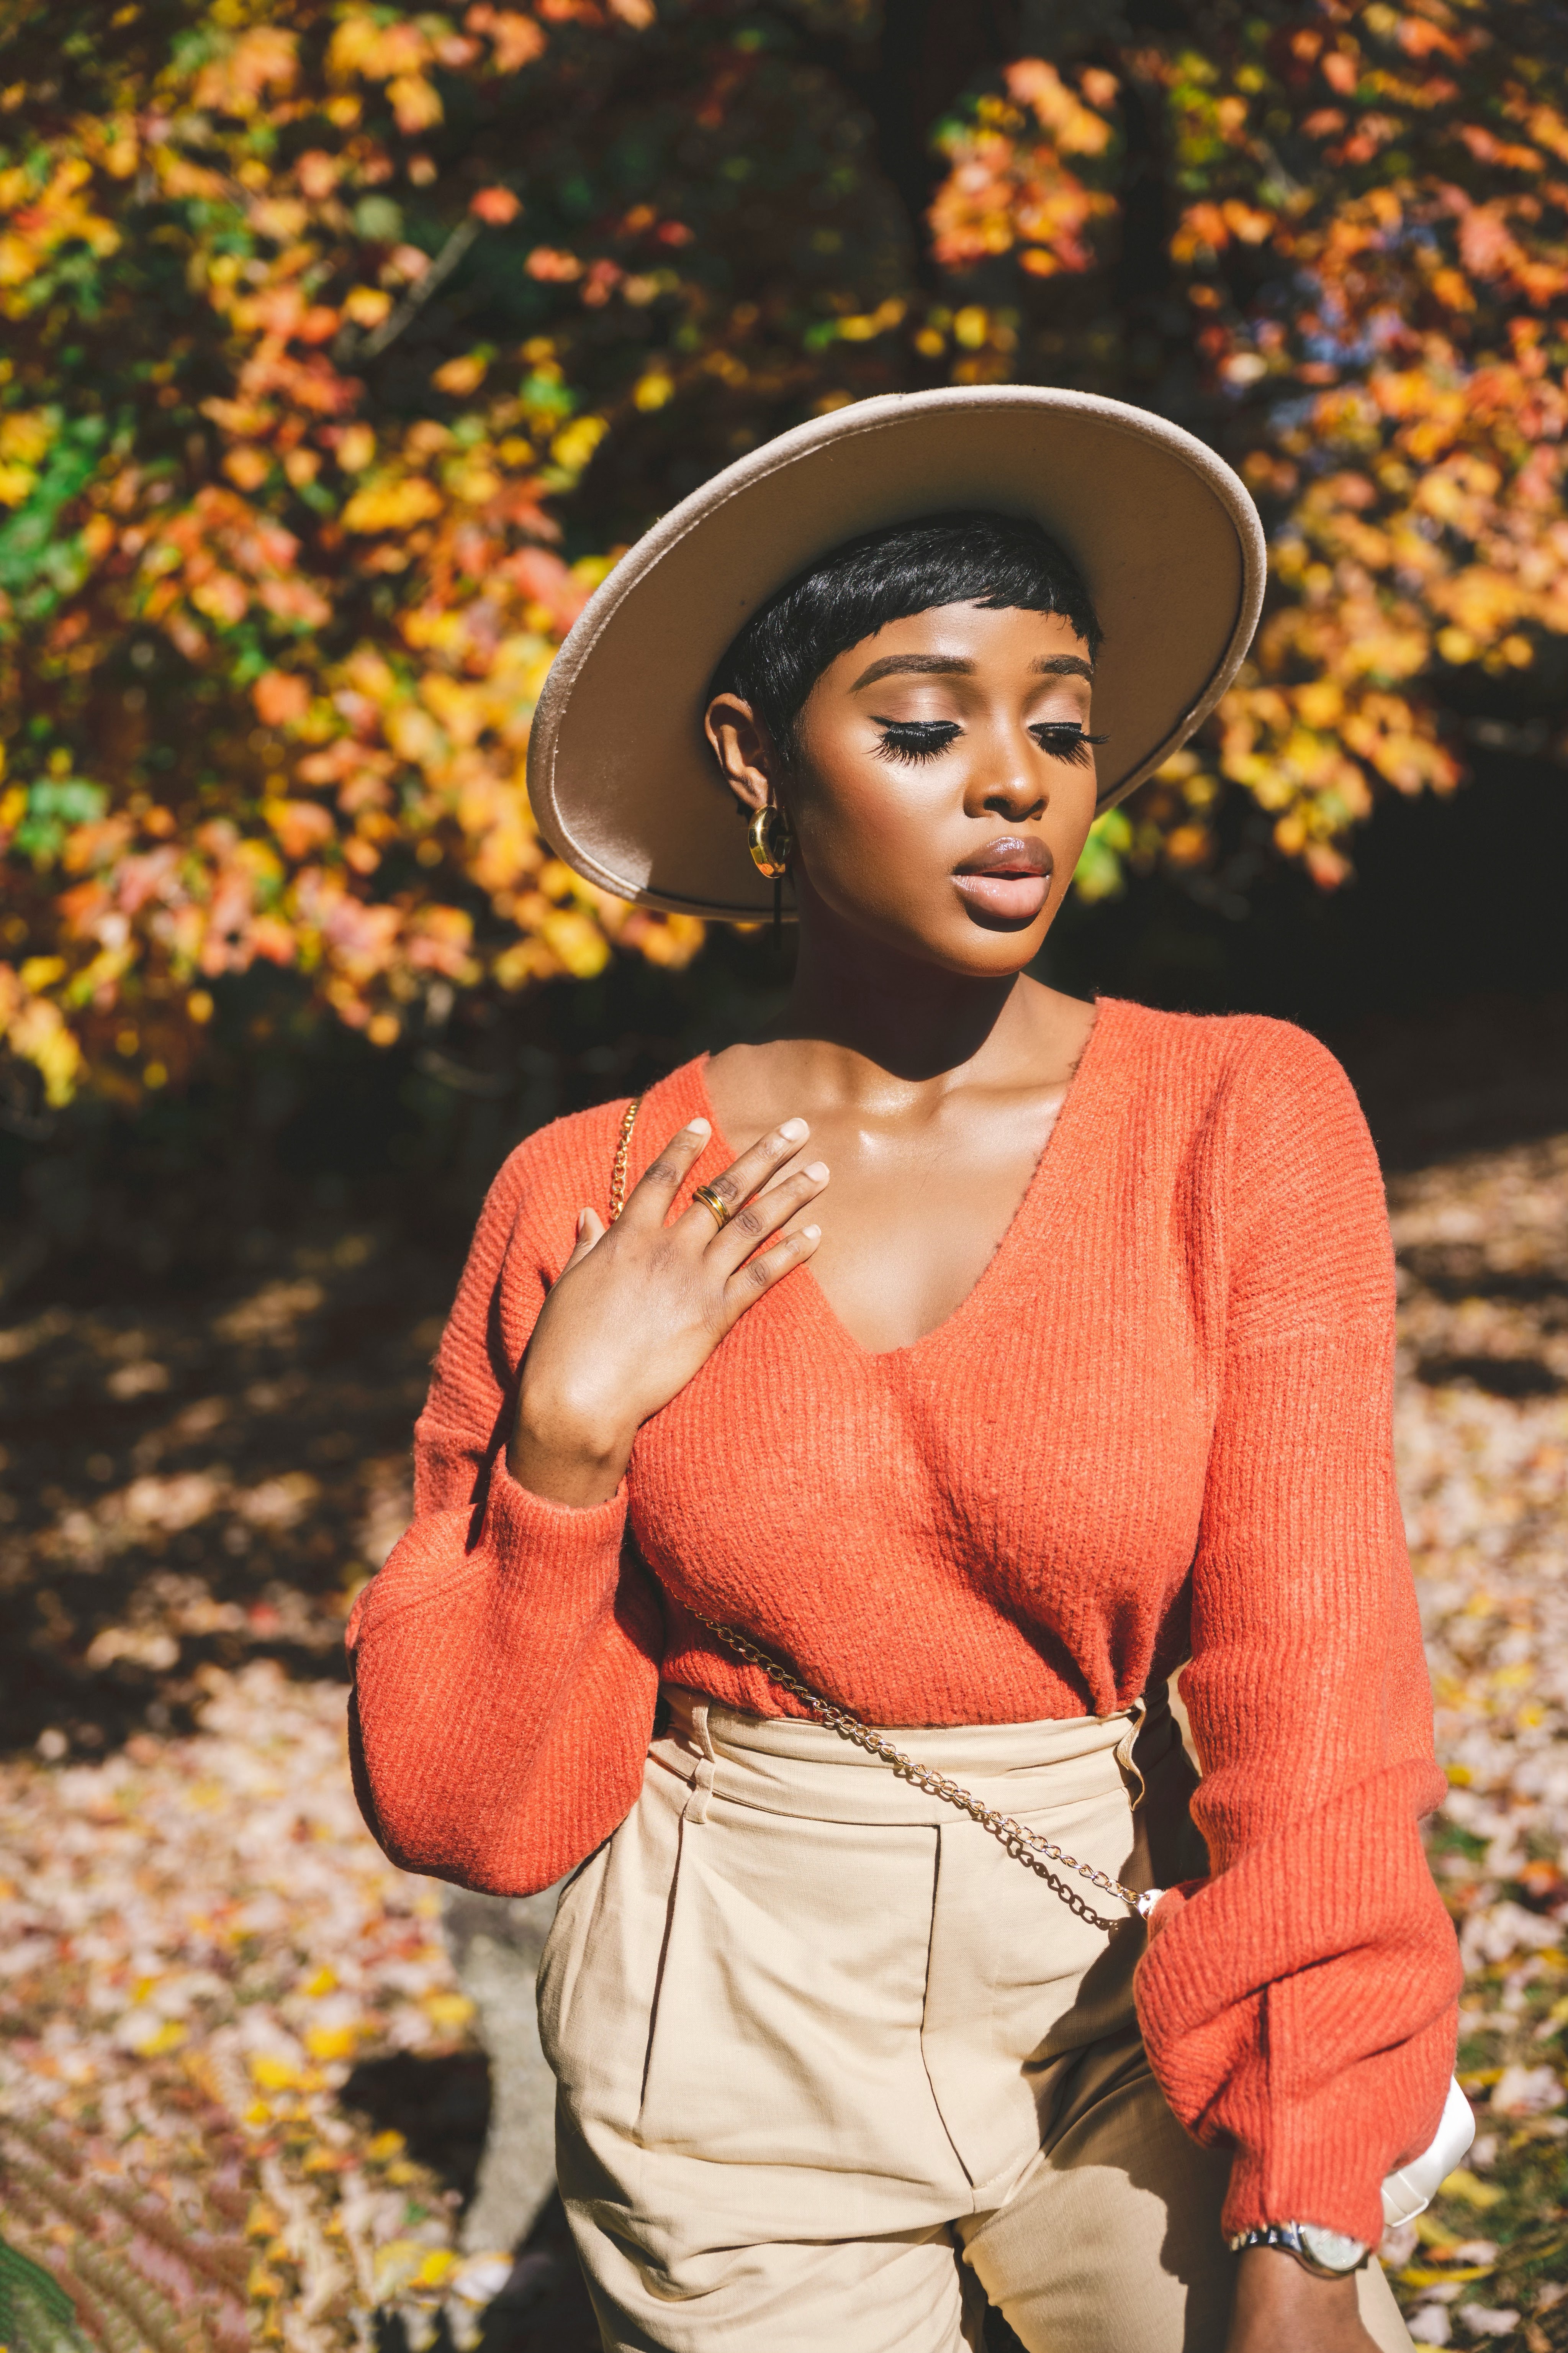 How to style a sweater in autumn